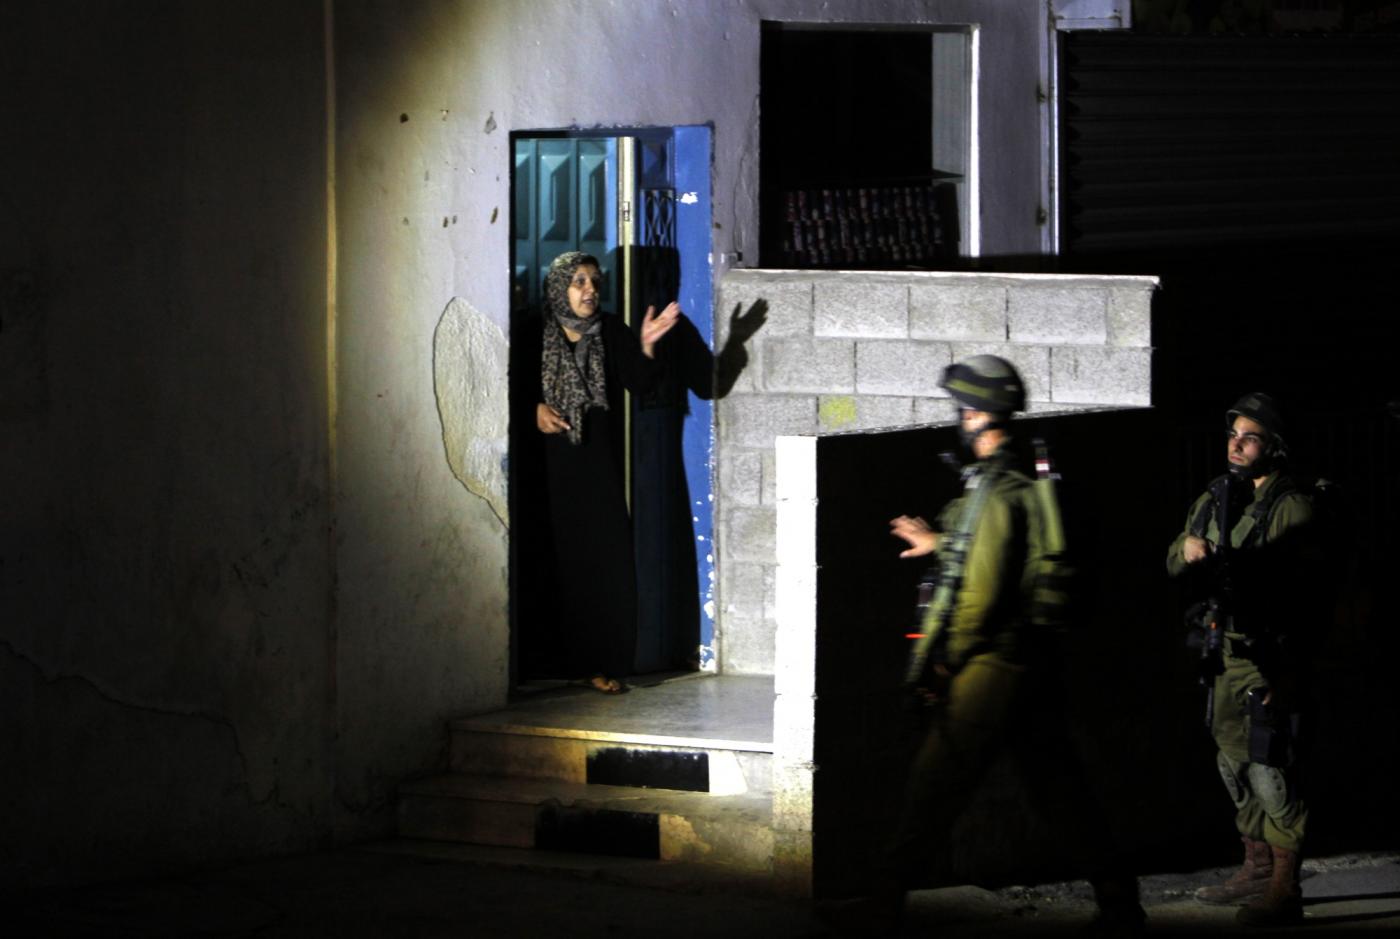 Israeli soldiers interrogate a Palestinian woman during a 2014 raid in the occupied West Bank (AFP)